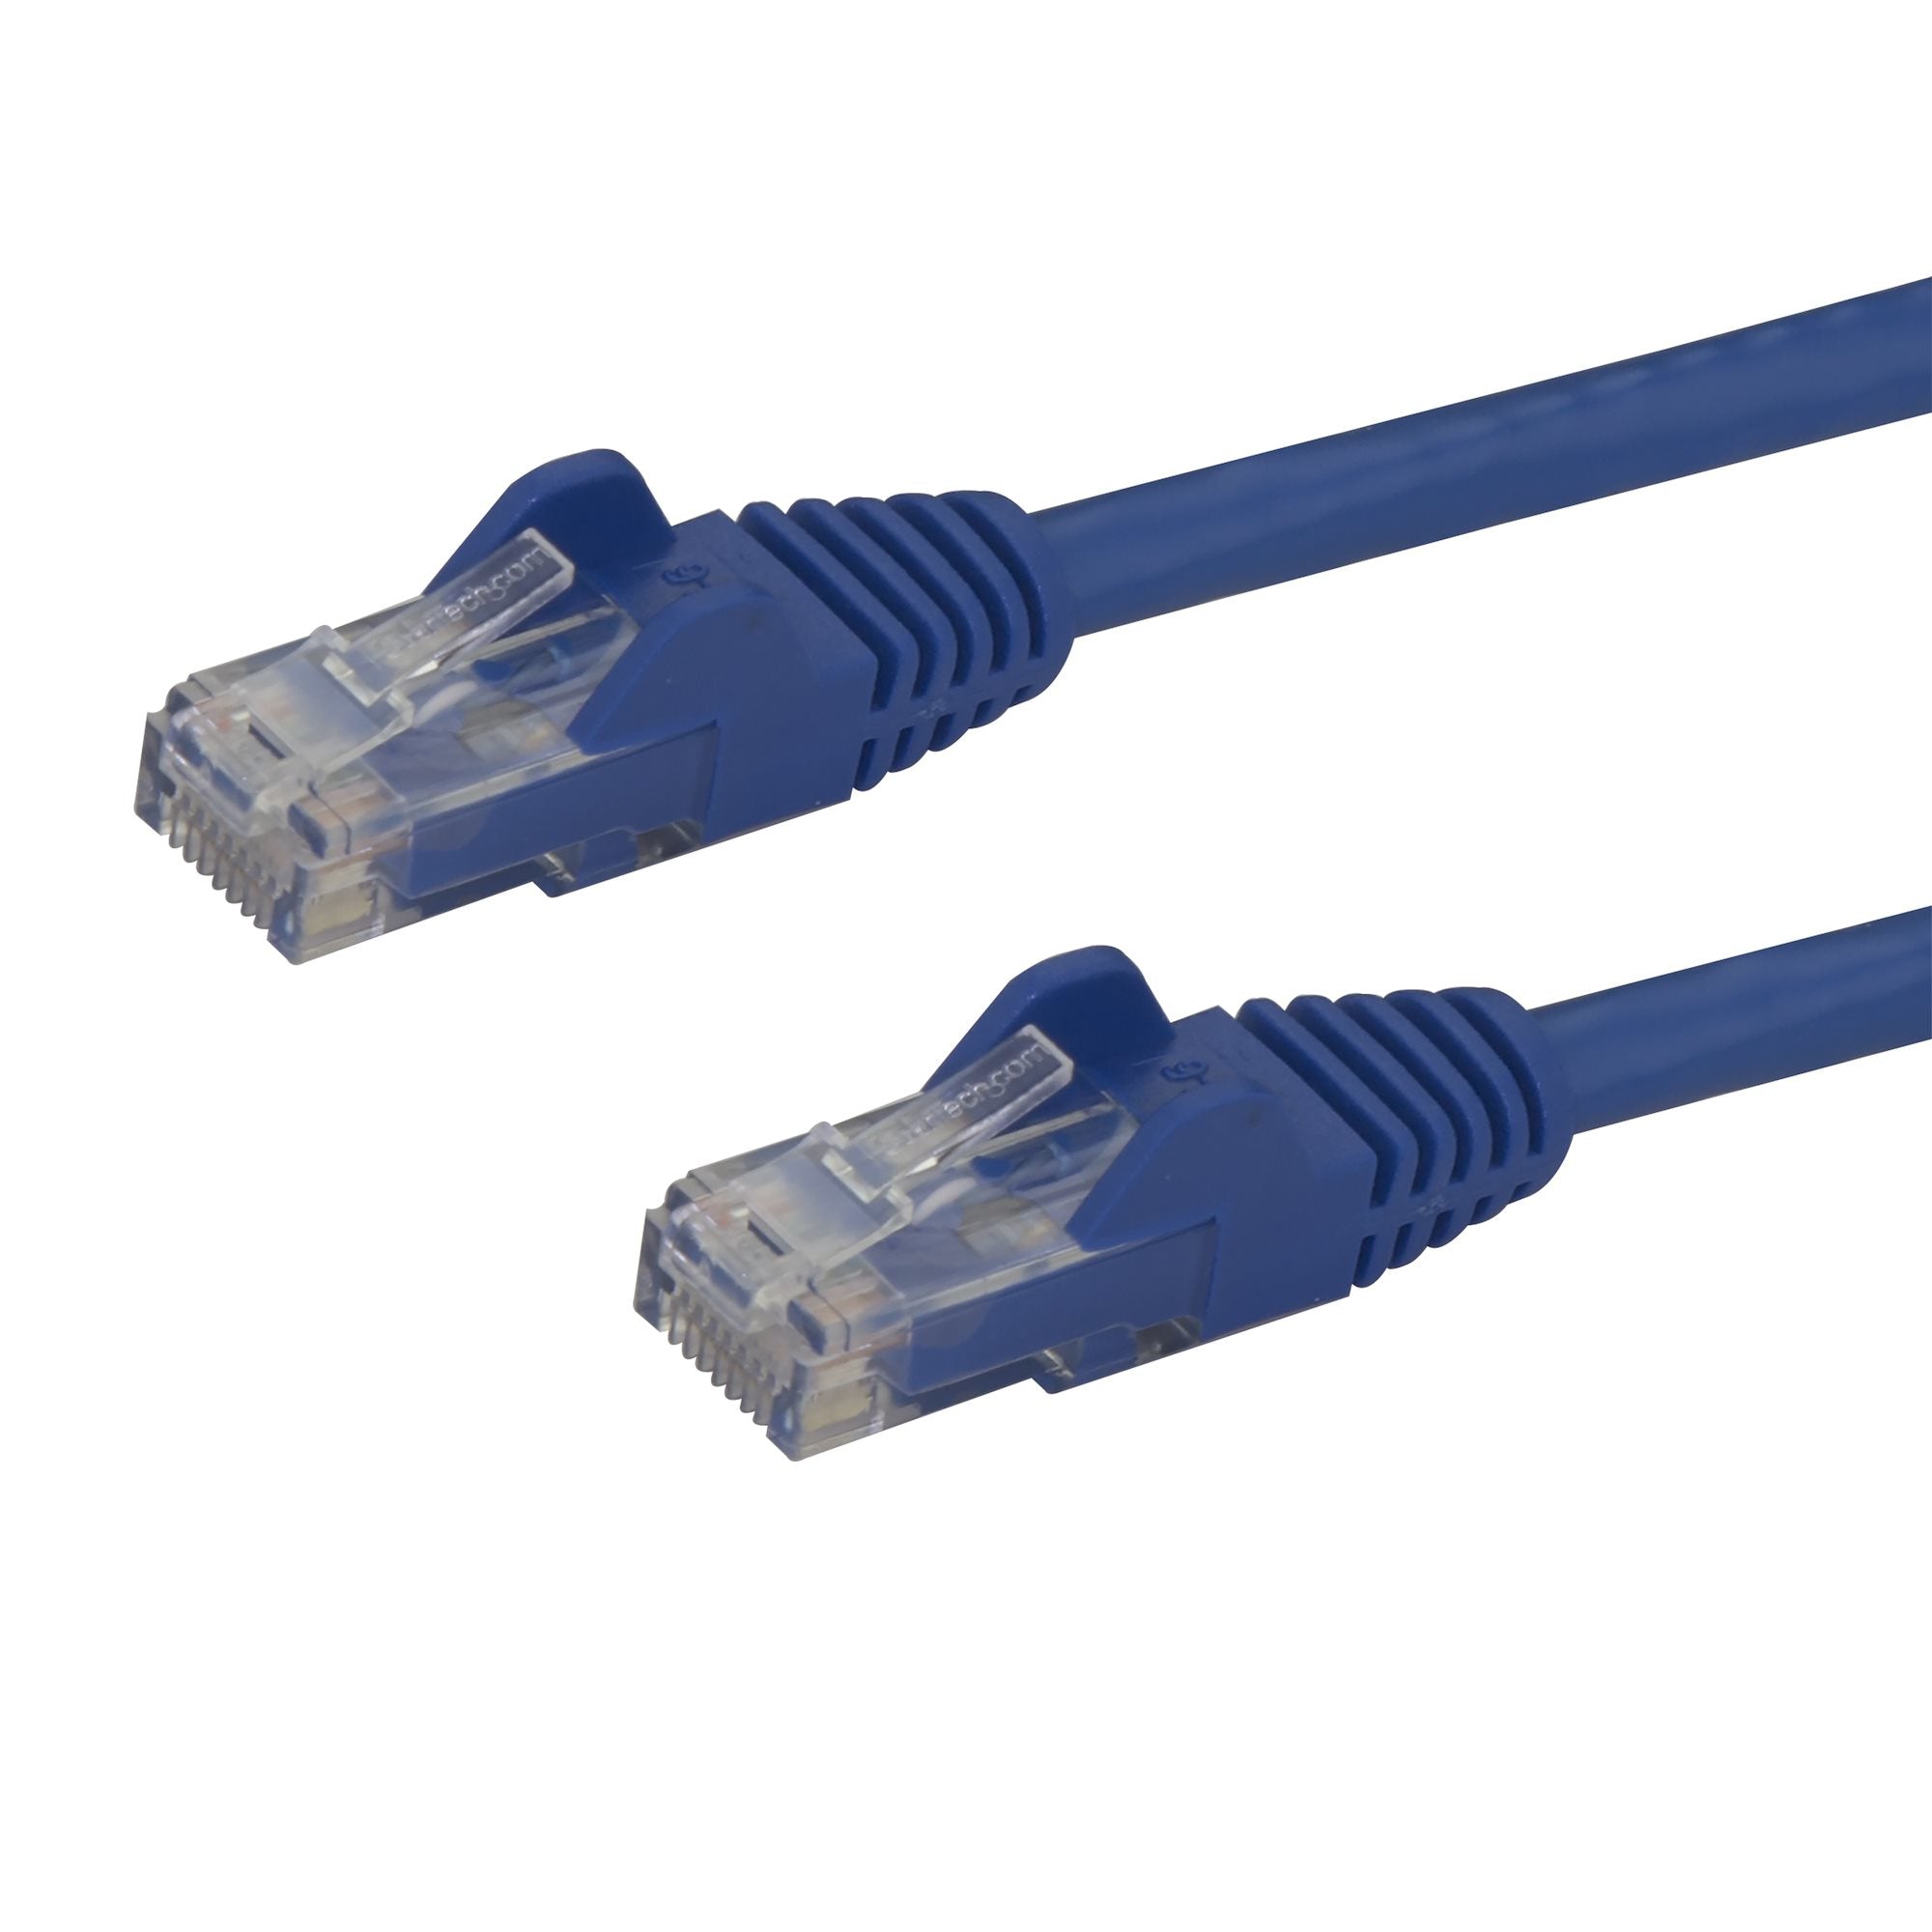 StarTech.com 1m CAT6 Ethernet Cable - Blue CAT 6 Gigabit Ethernet Wire -650MHz 100W PoE RJ45 UTP Network/Patch Cord Snagless w/Strain Relief Fluke Tested/Wiring is UL Certified/TIA